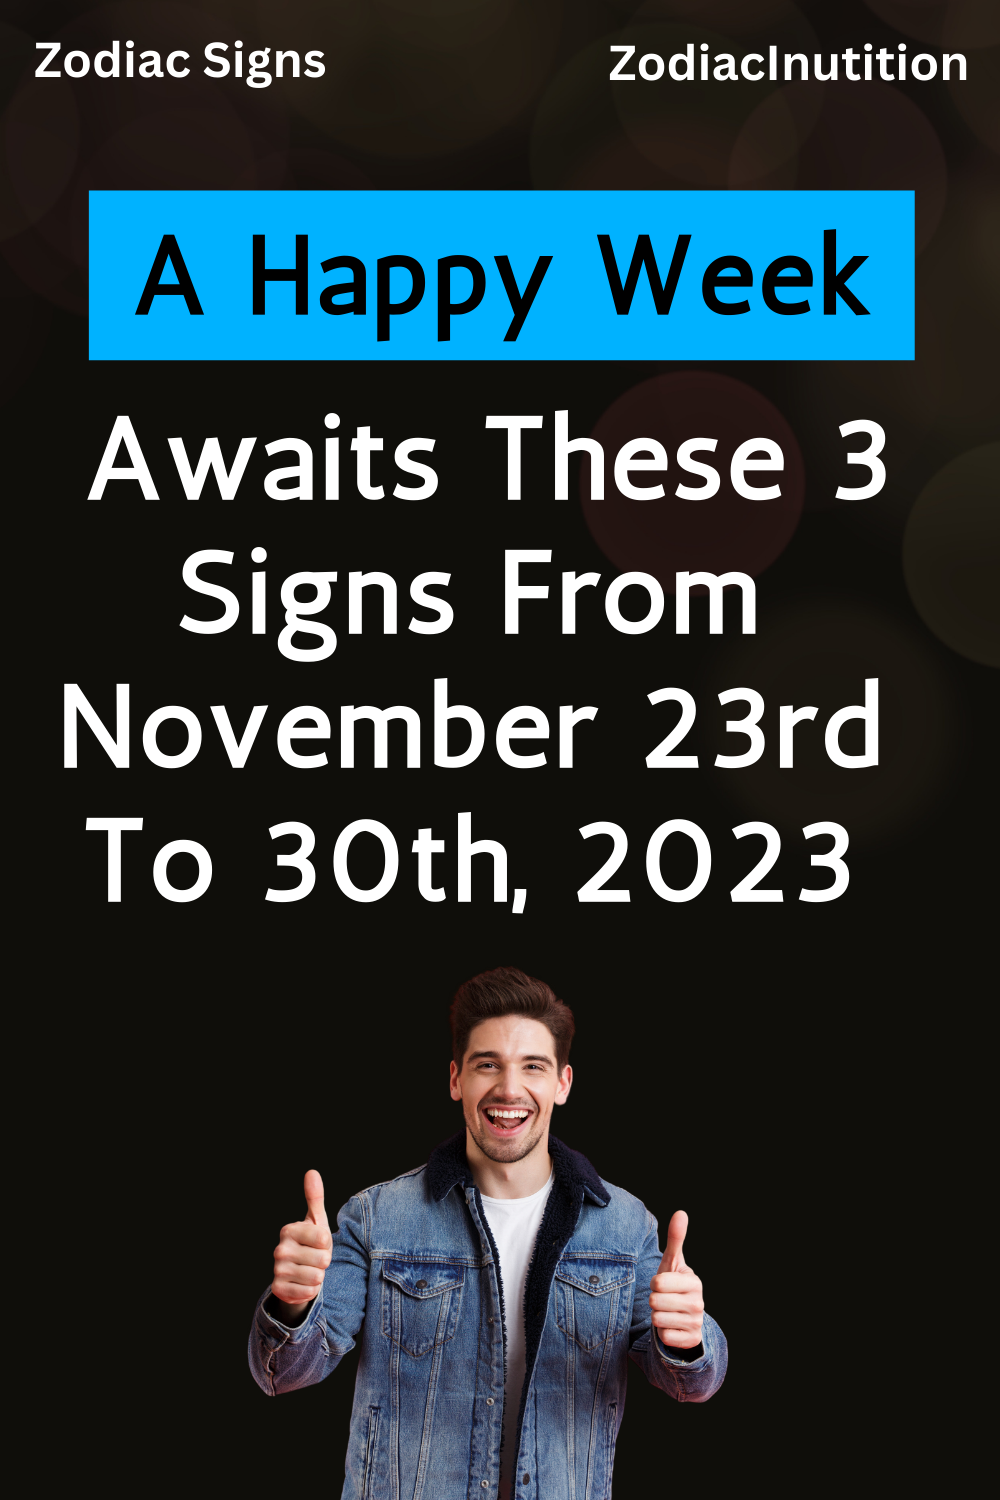 A Happy Week Awaits These 3 Signs From November 23rd To 30th, 2023